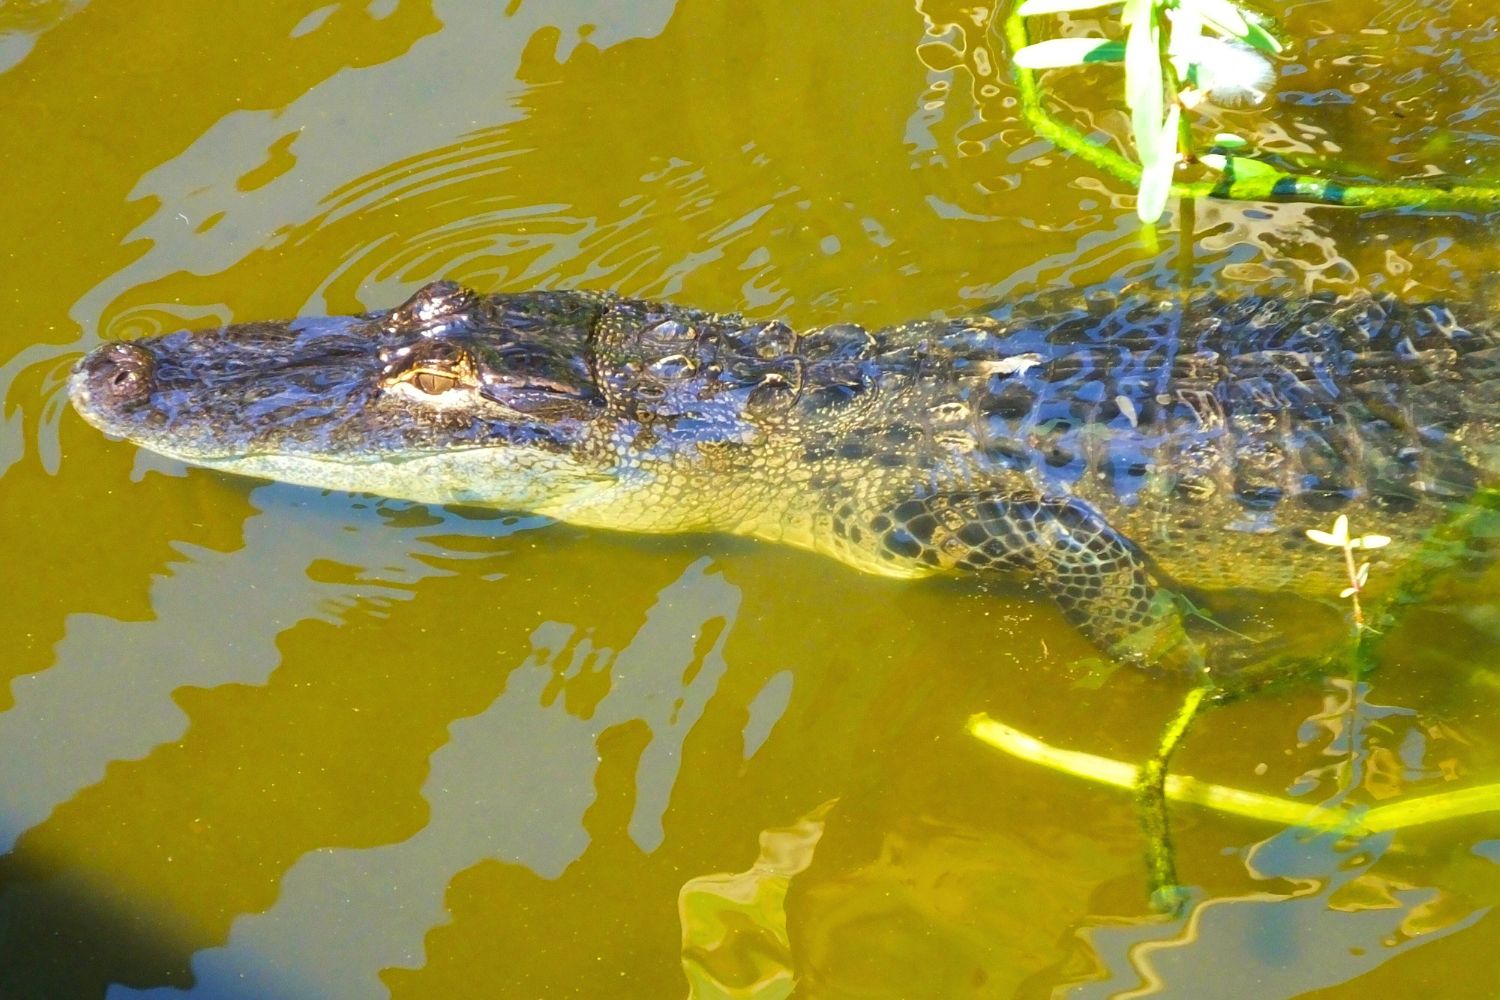 10. Caimans can be spotted all throughout the Amazon.